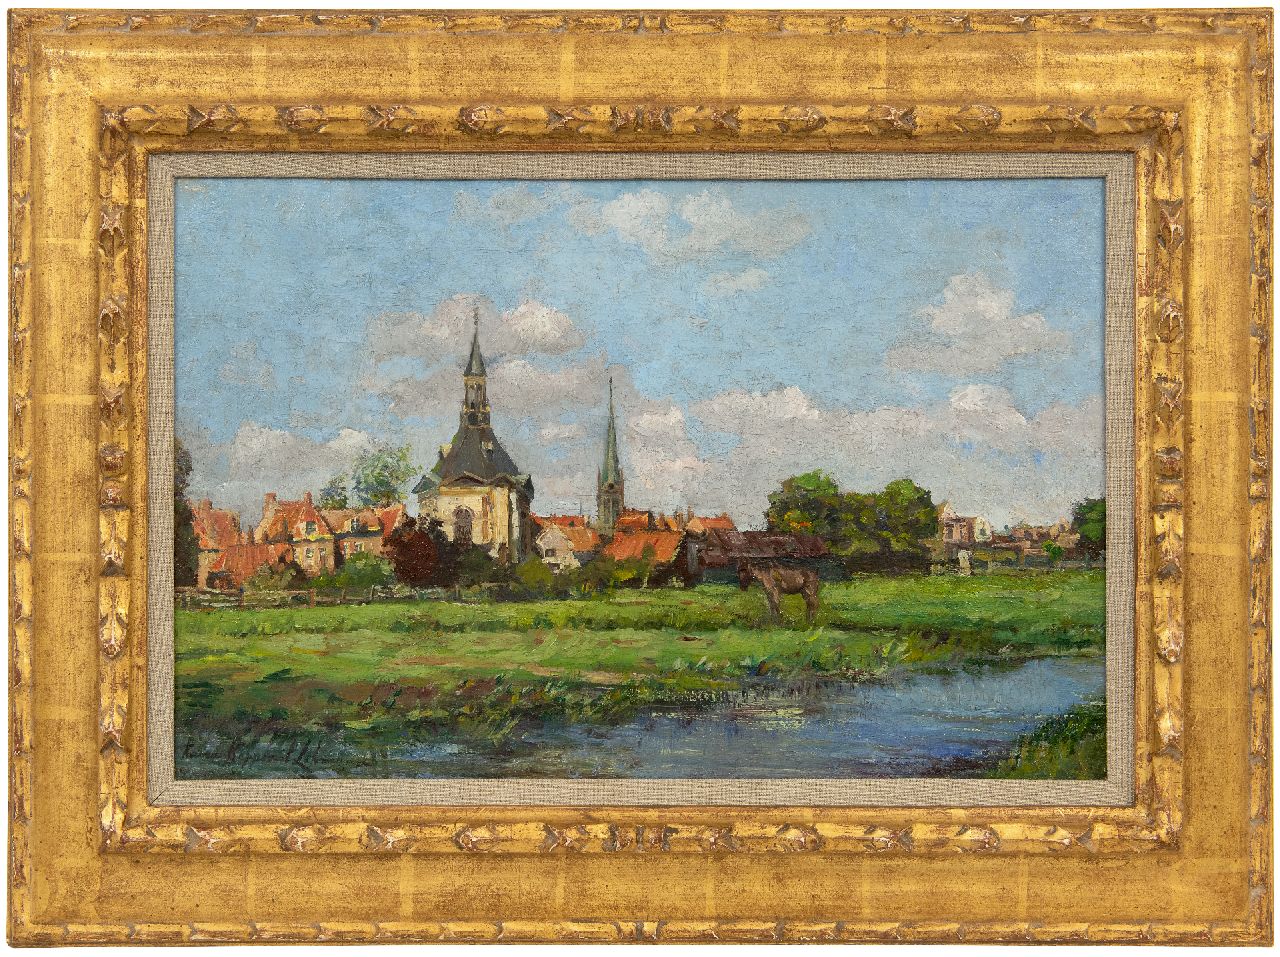 Lehmann A.E.F.  | 'Anna' Elisabeth Frederika Lehmann | Paintings offered for sale | A view of Leidschendam with the Dorpskerk, oil on canvas 30.0 x 46.0 cm, signed l.l.